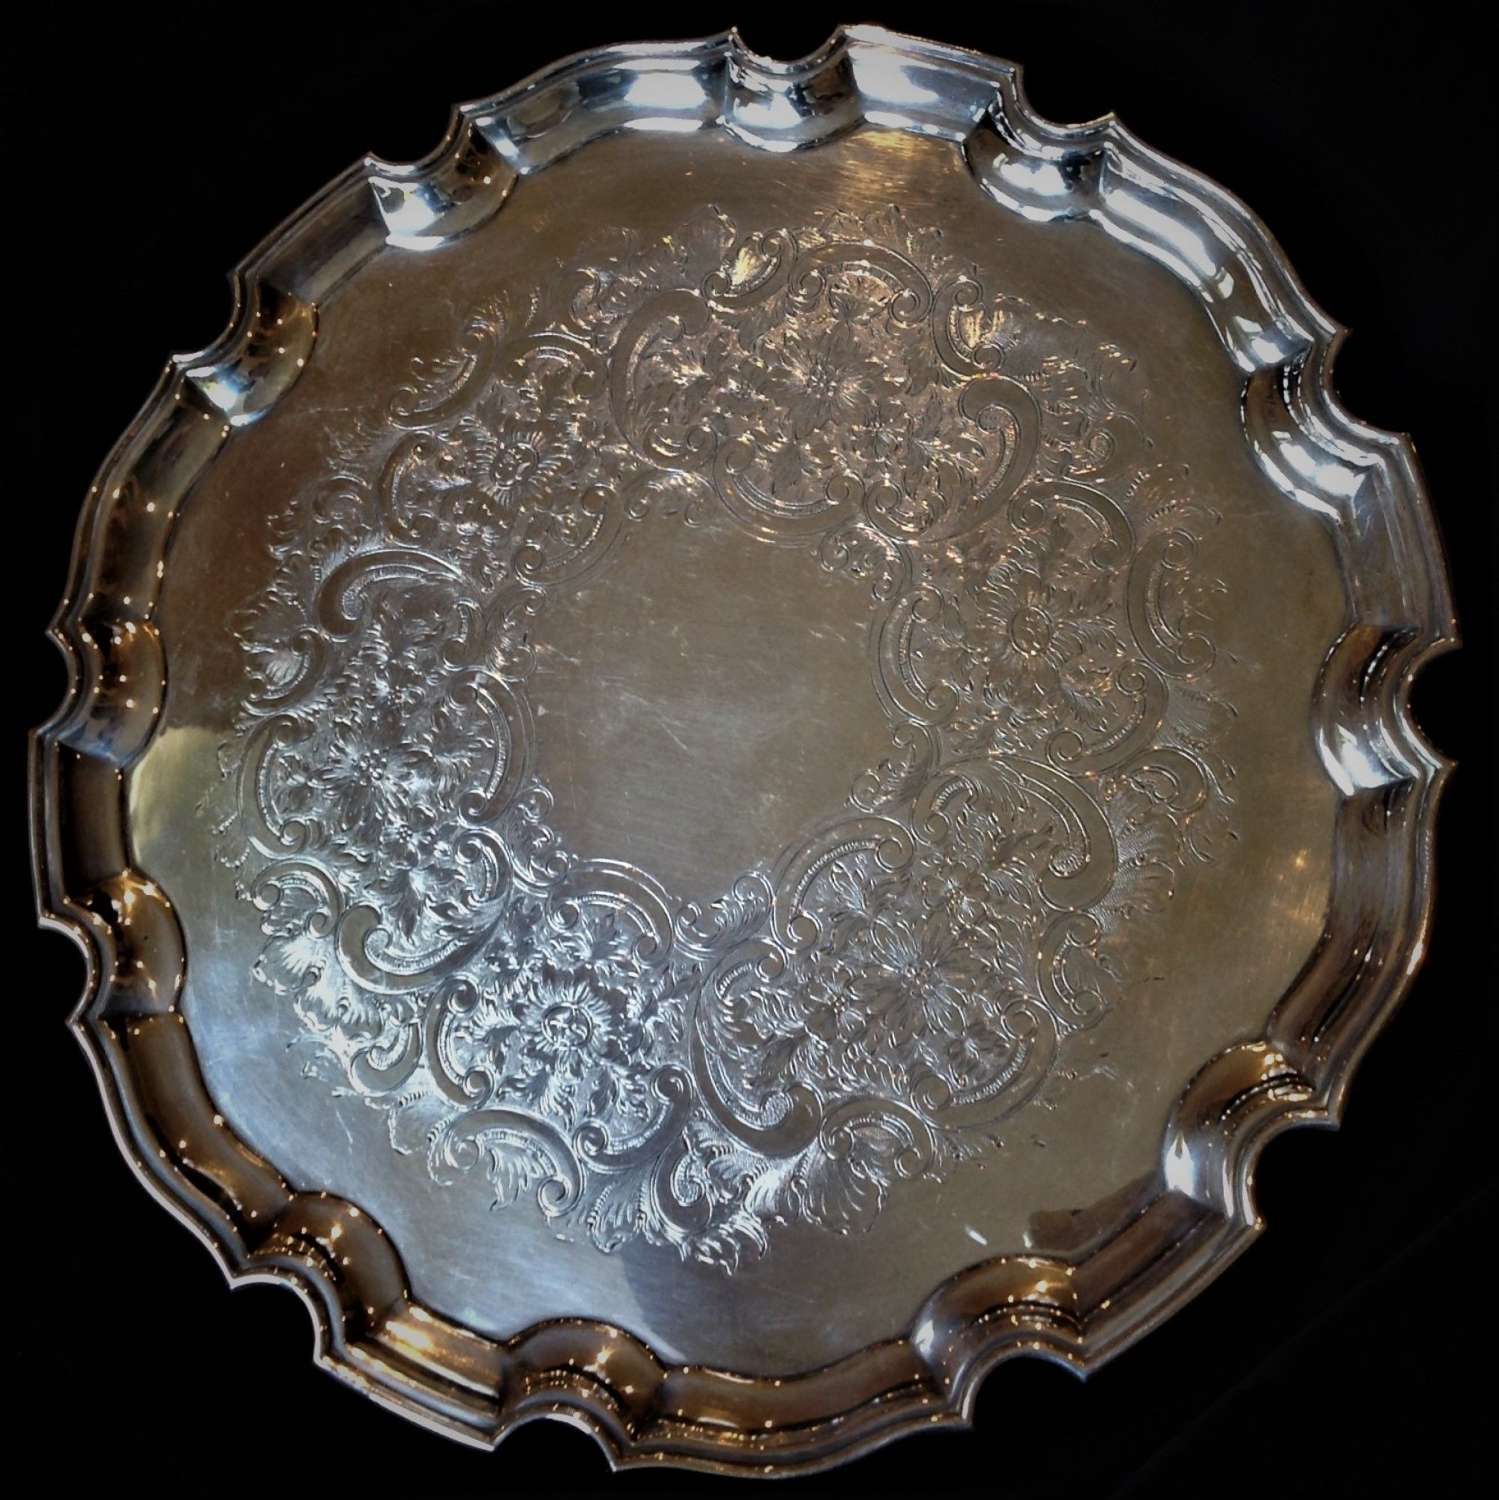 Circular, silver plated scalloped edge serving tray